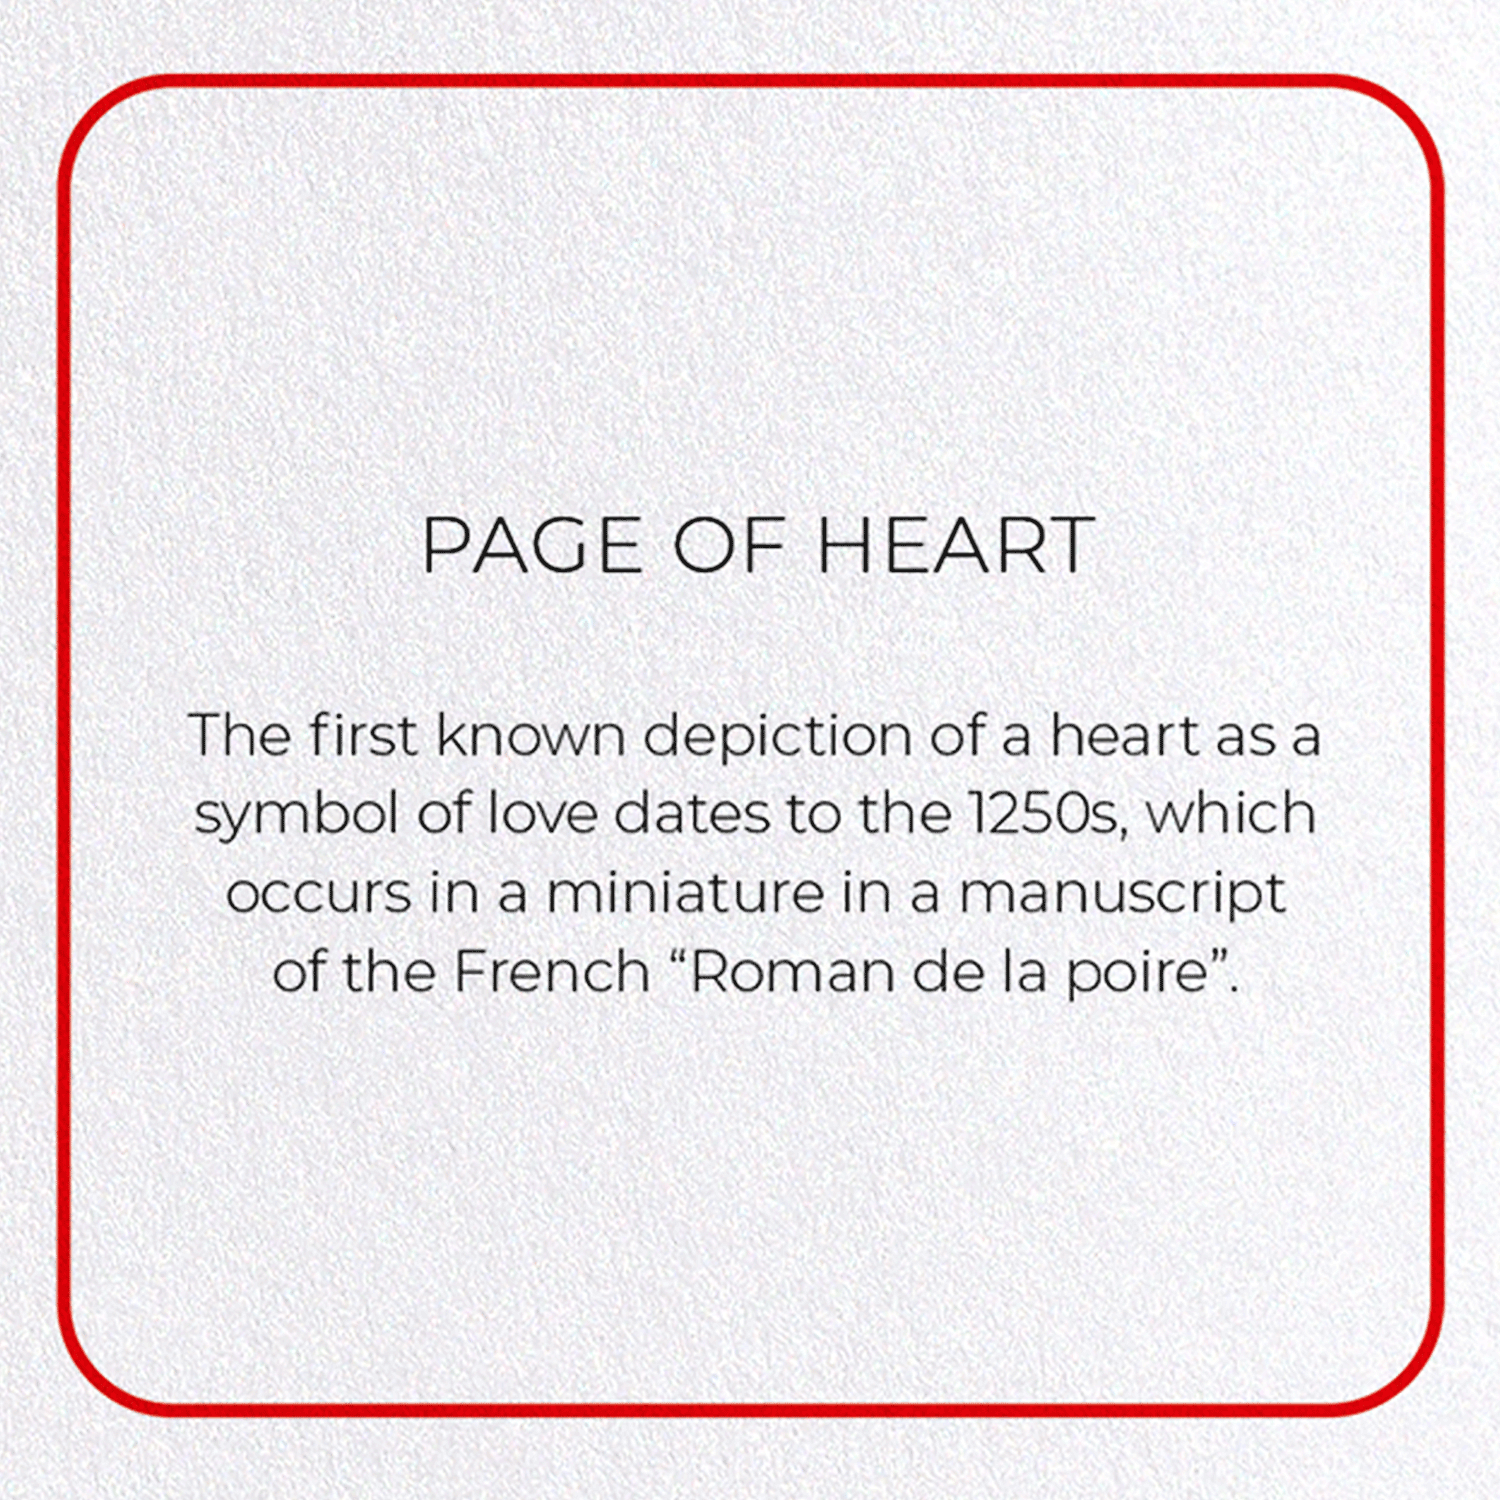 PAGE OF HEART